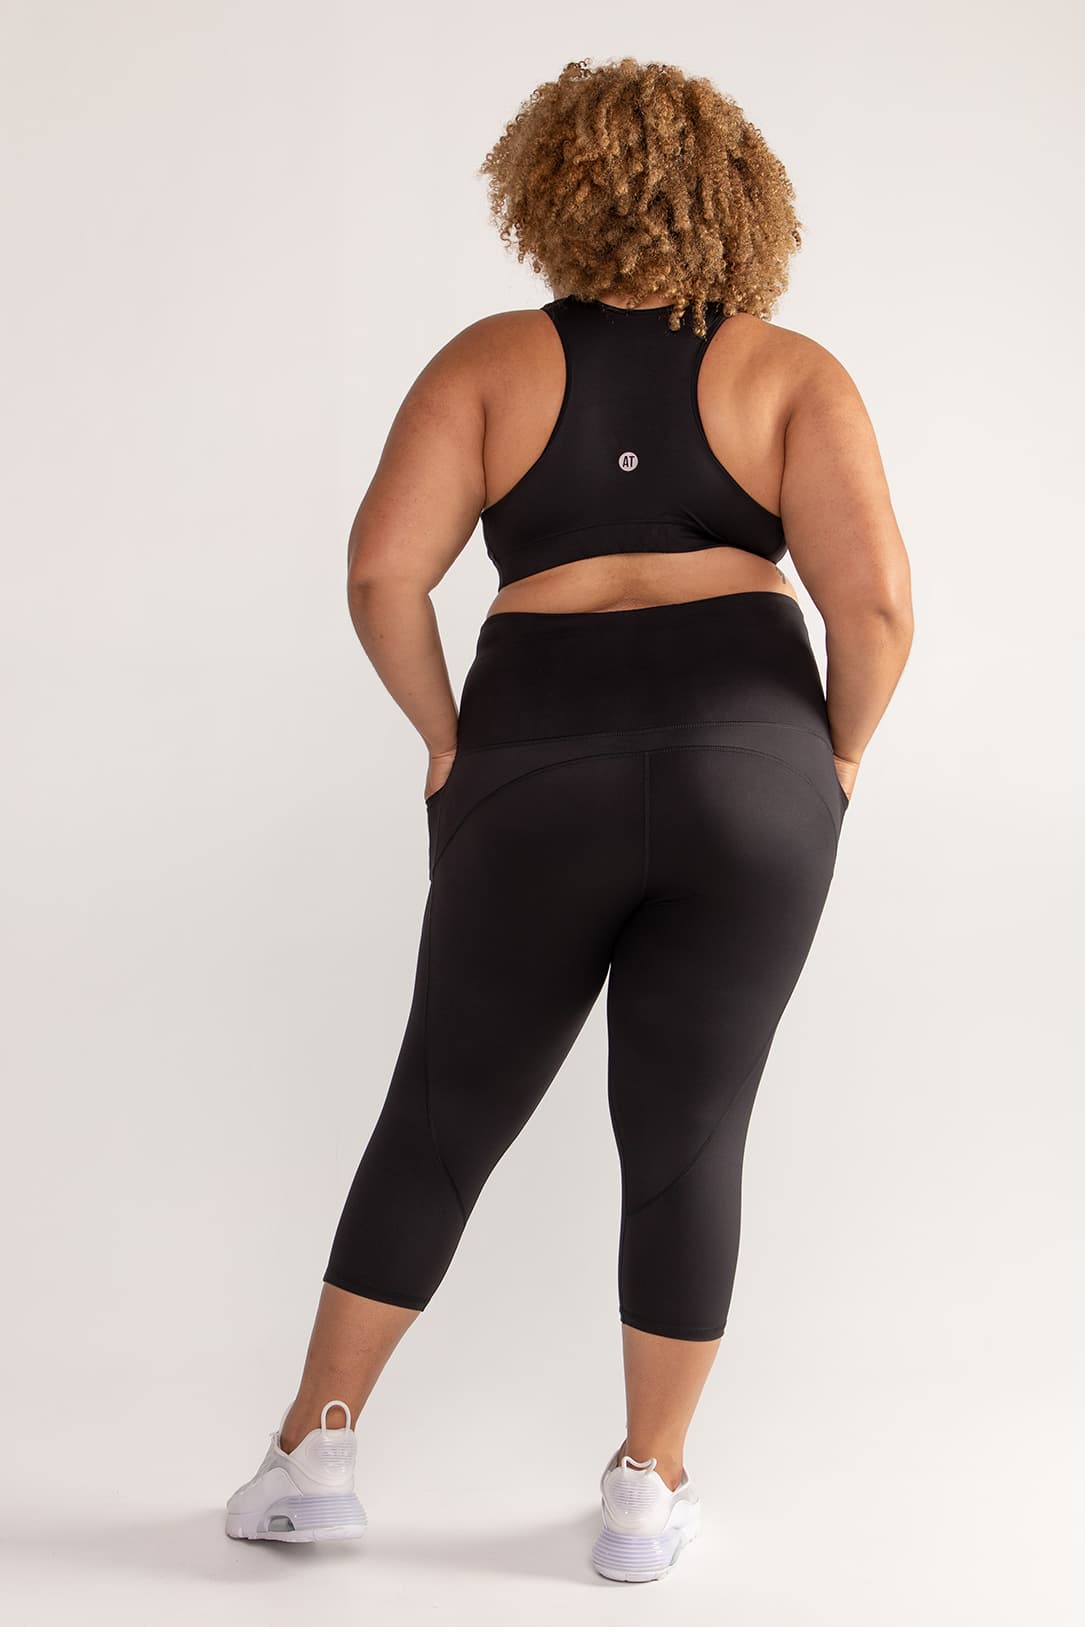 34length-gym-tights-black-plussize-back